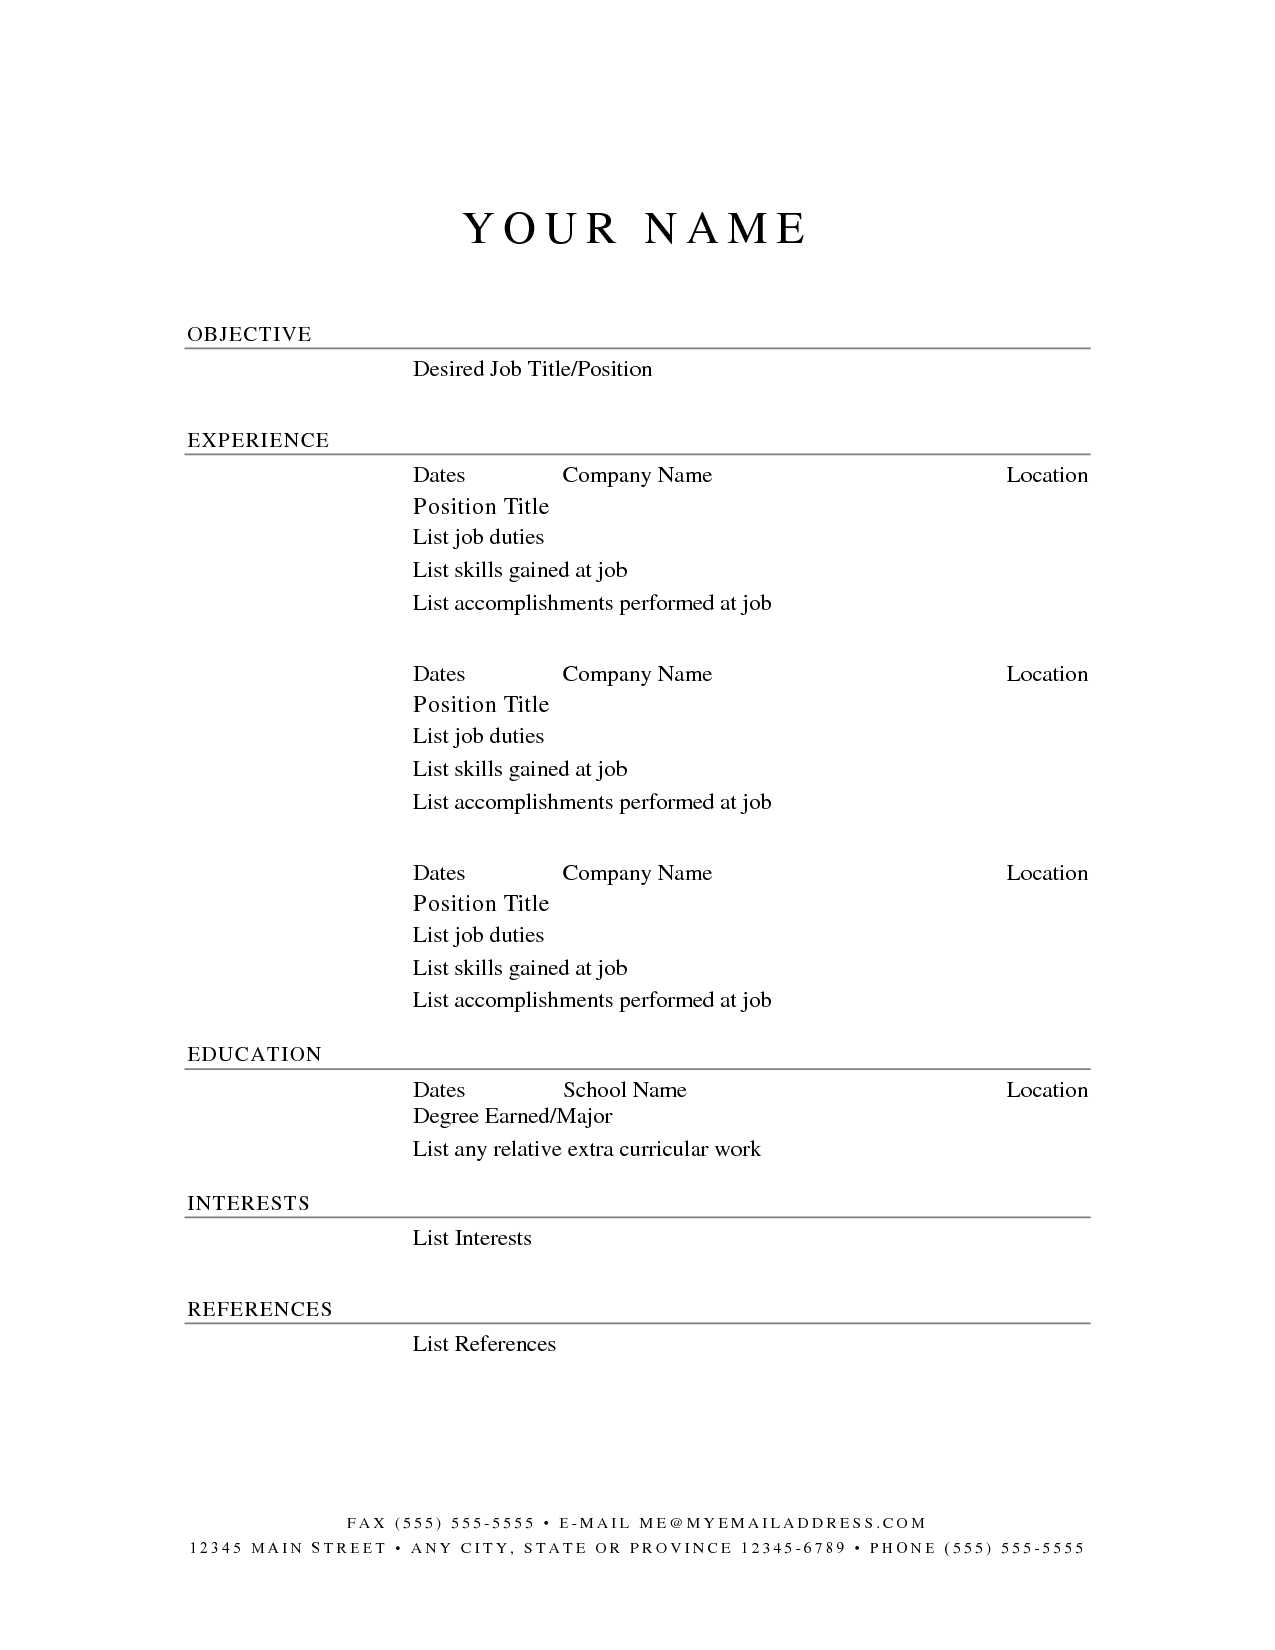 Free Blank Resume Templates For Microsoft Word Regarding Free Blank Resume Templates For Microsoft Word